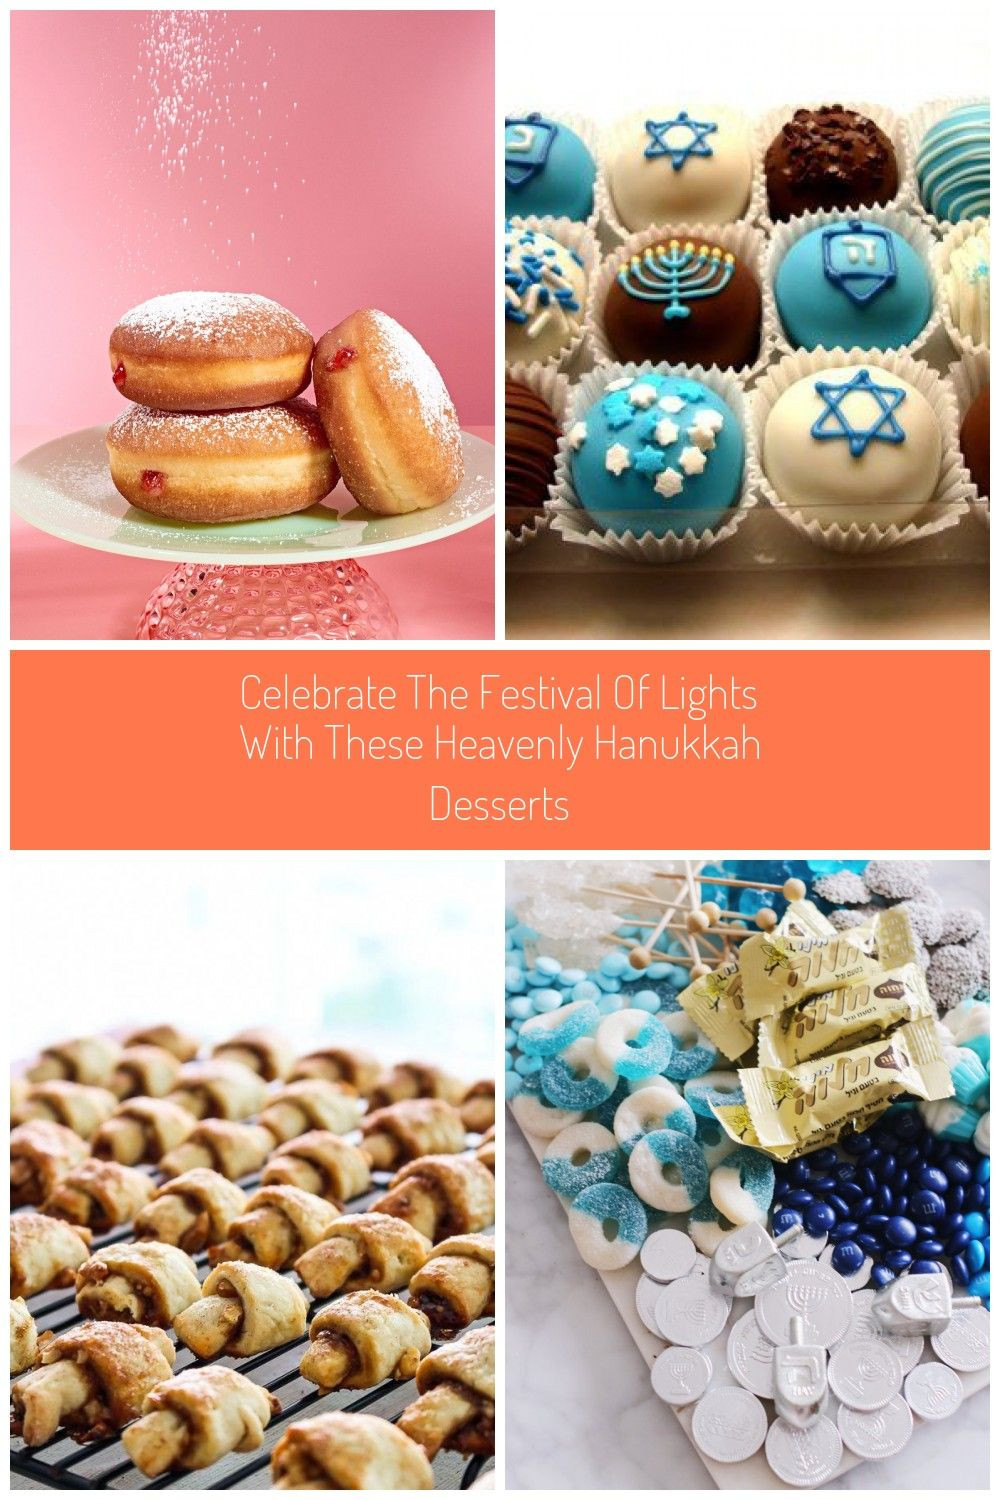 Traditional Hanukkah Desserts
 Rugelach donuts and cookiesoh my Find delicious recipes